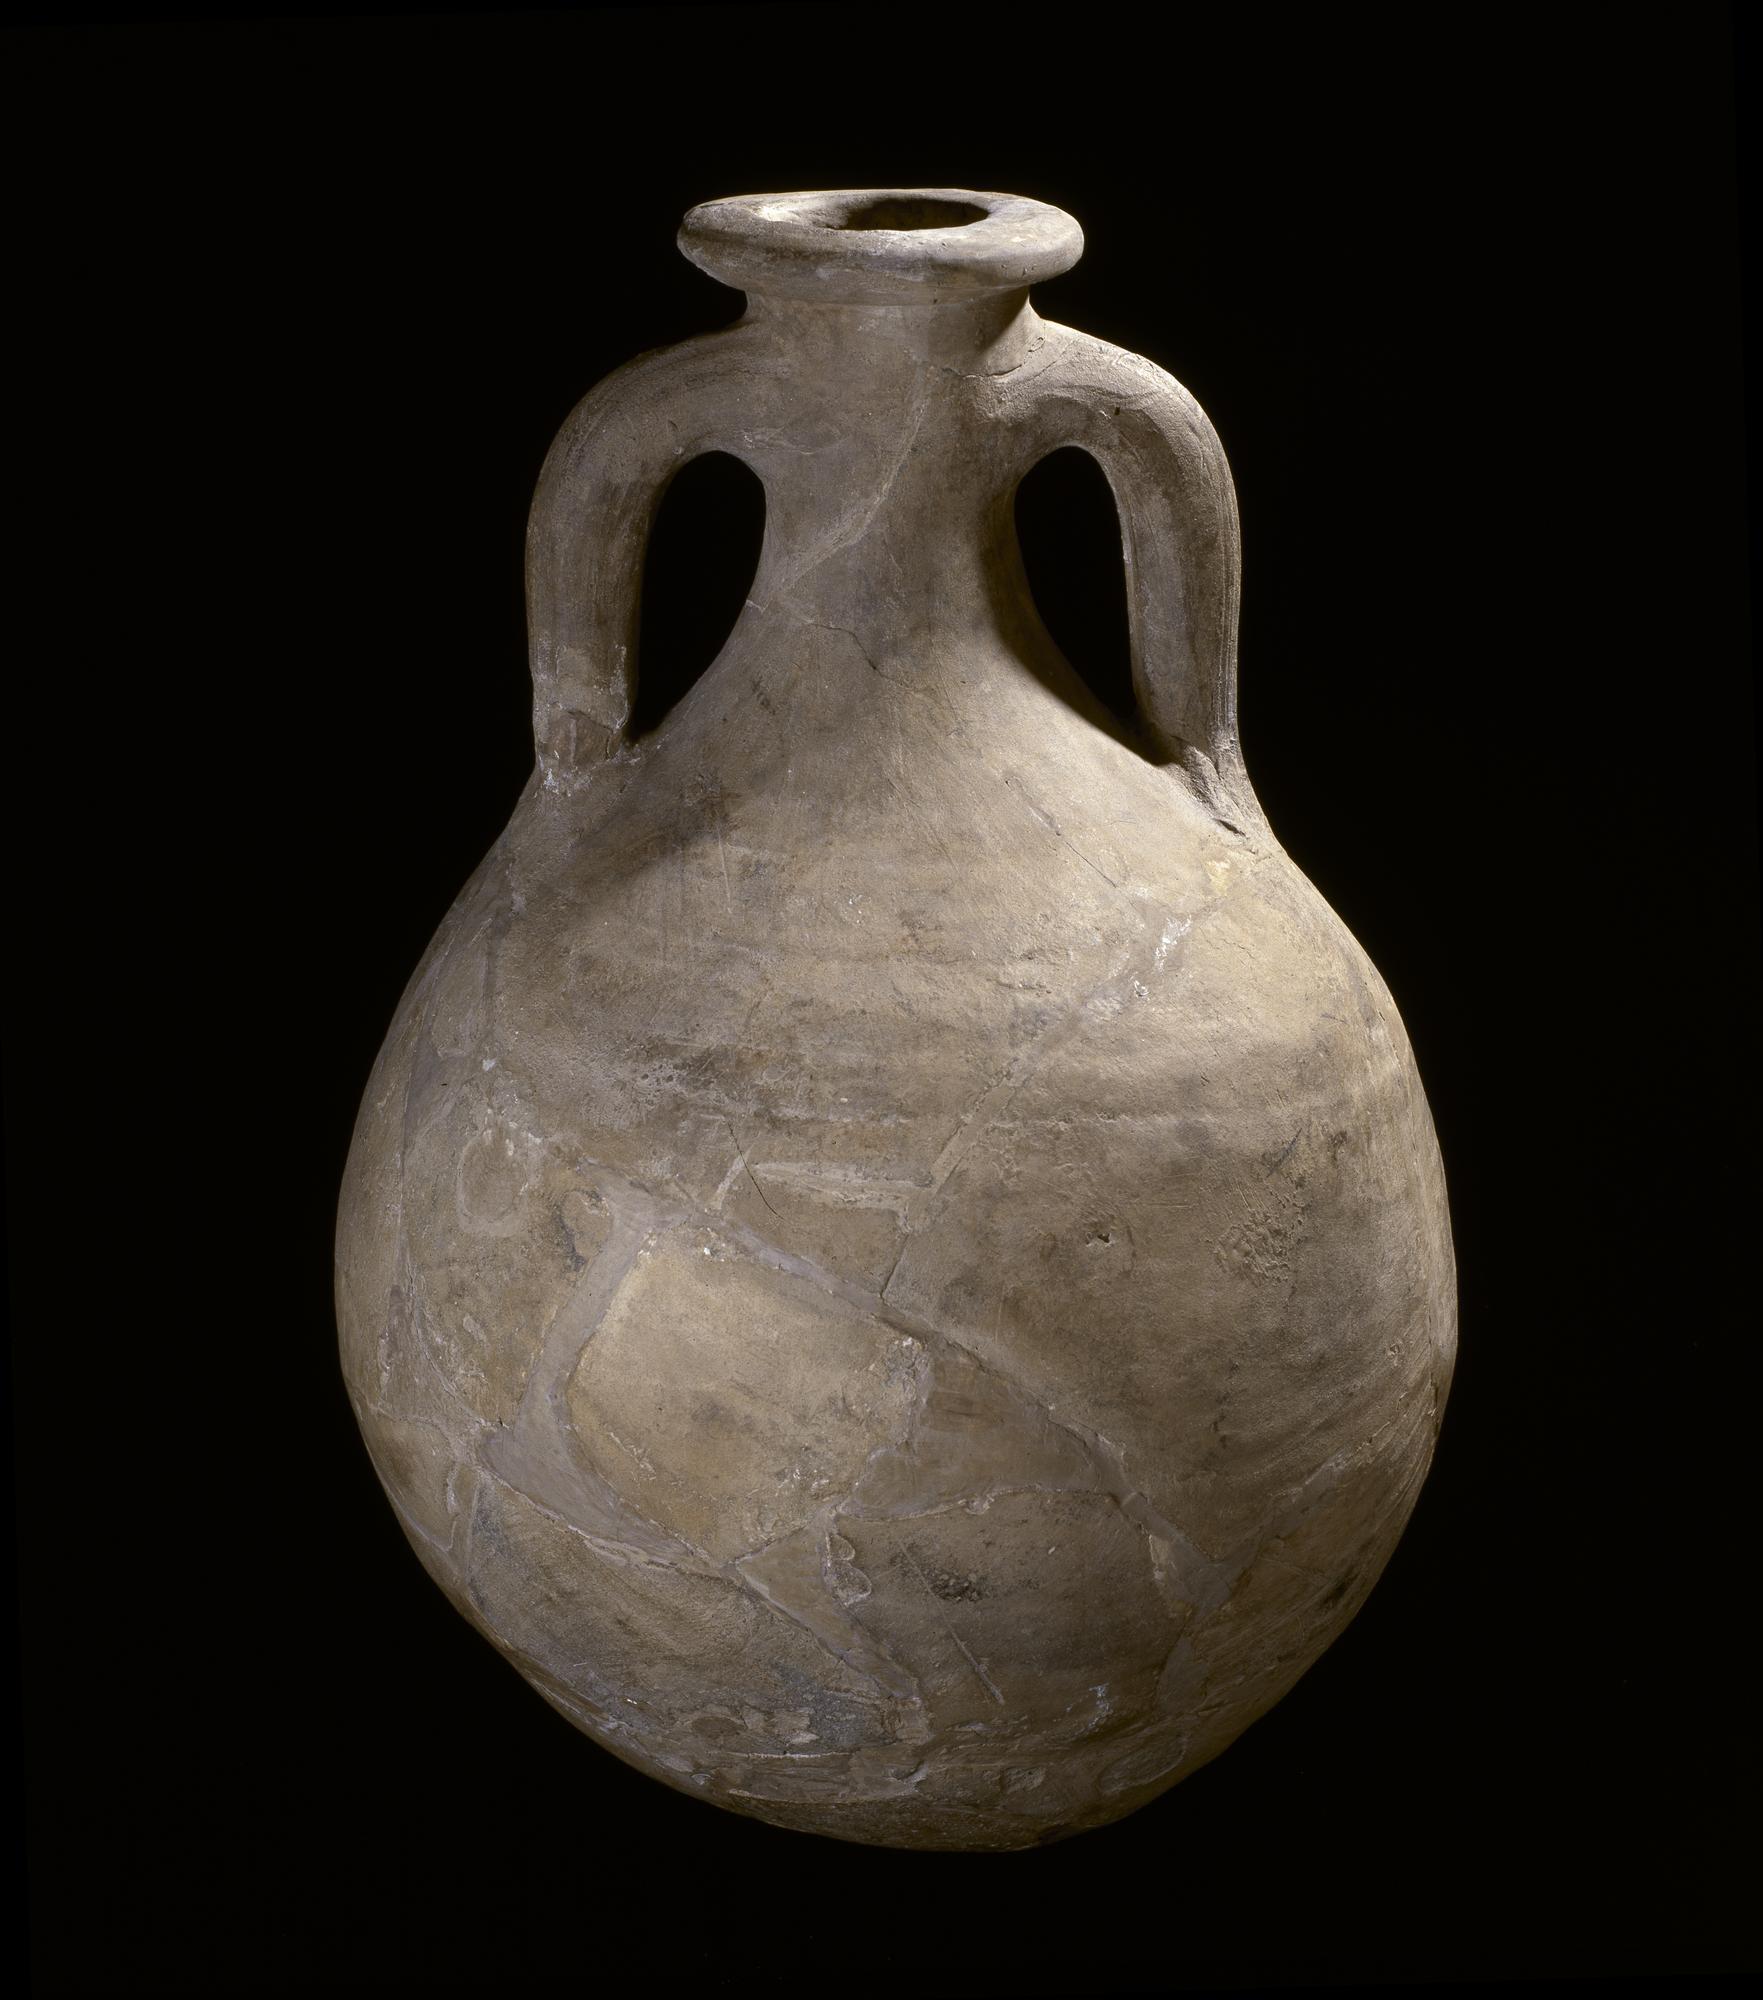 Image of Restored amphora with slightly elongated neck and rudimentary foot, from the Roman site at Newstead, 80 - 180 AD © National Museums Scotland